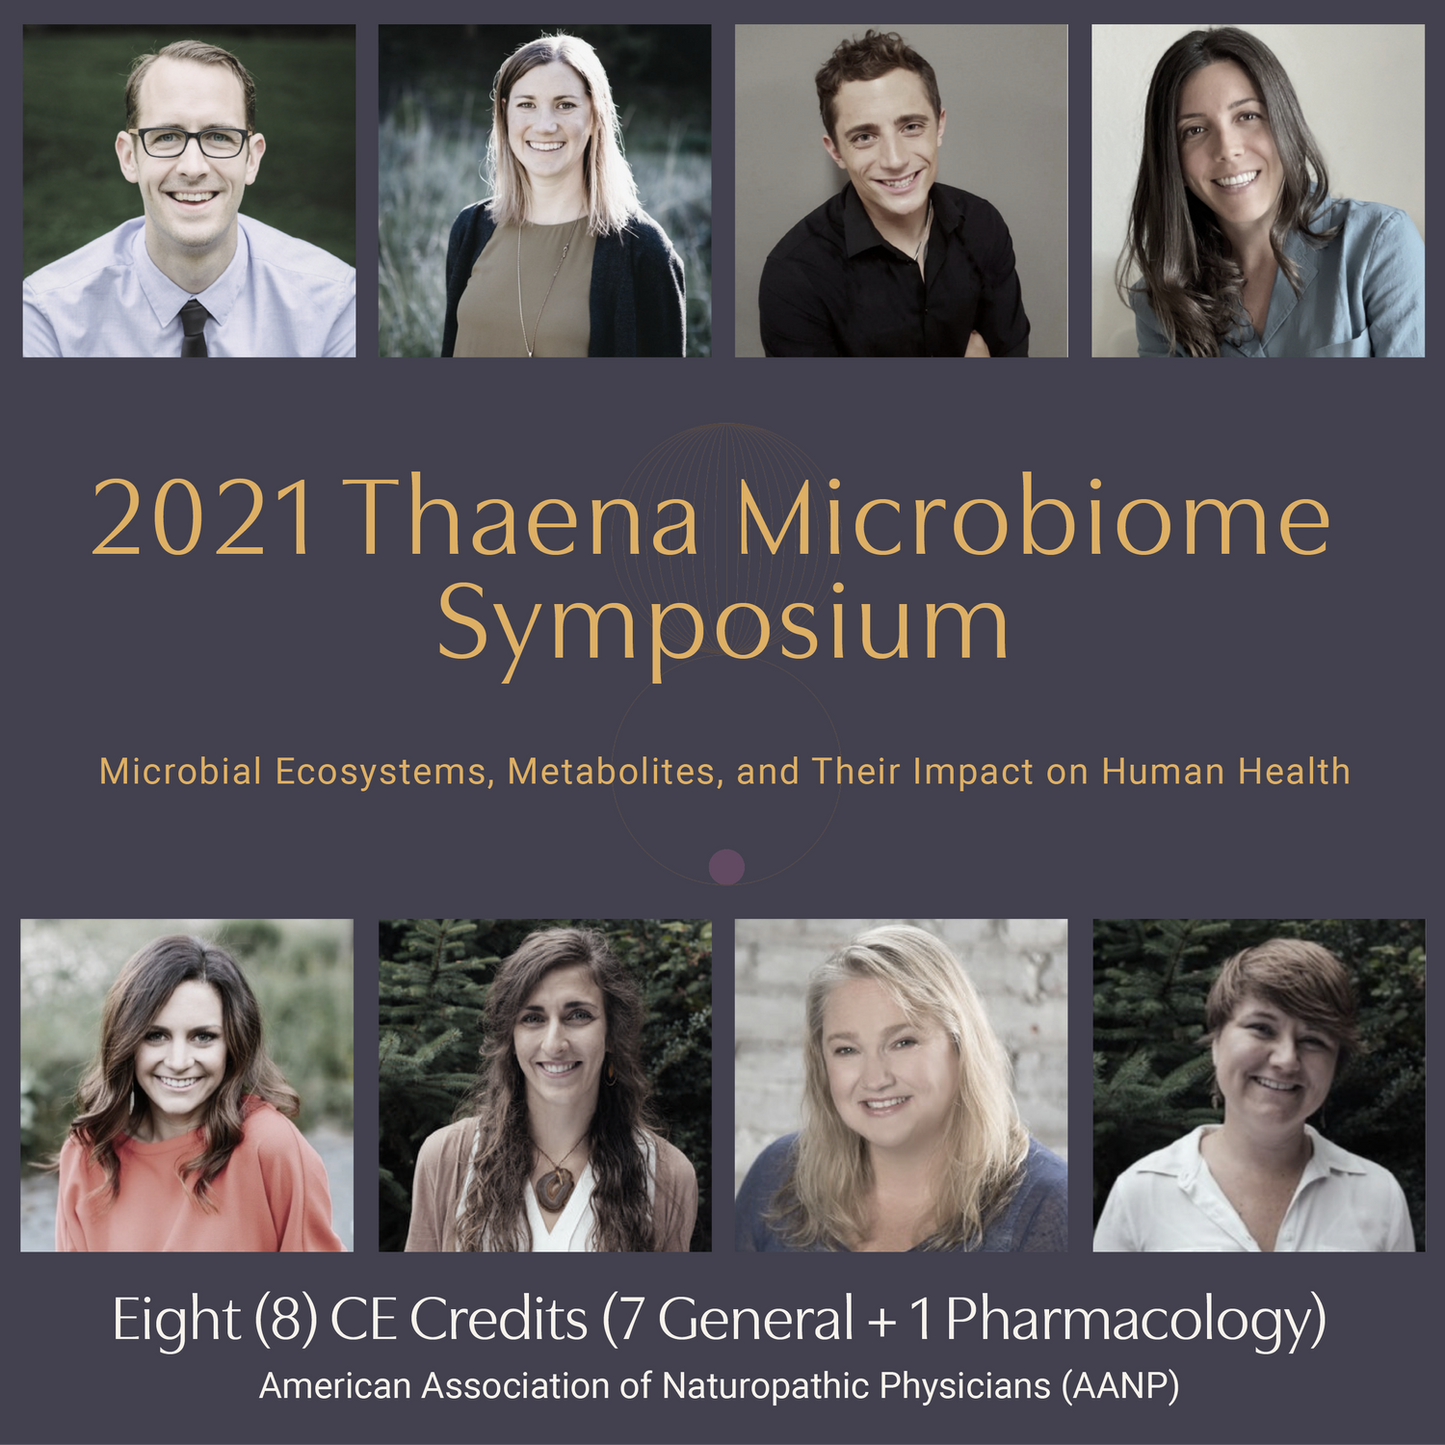 2021 Thaena Microbiome Symposium (7 General + 1 Pharmacology CE Credit)